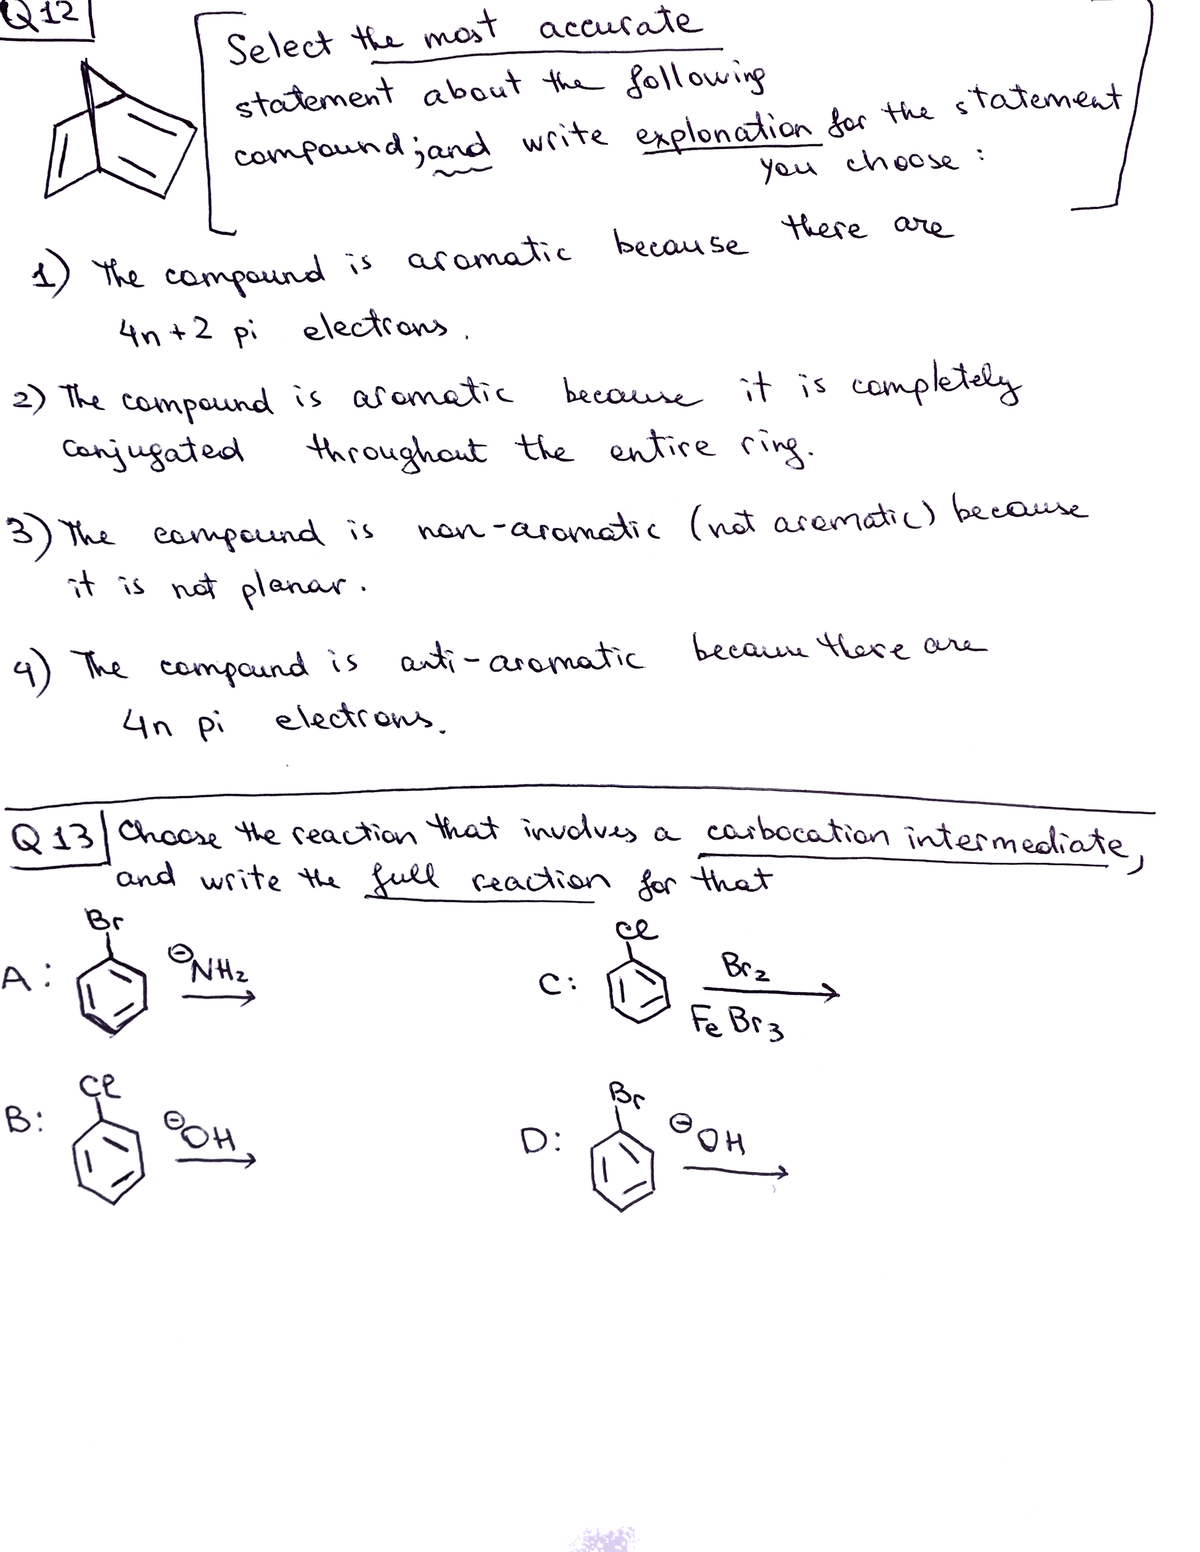 Select the mast accurate
statement about the following
compoundjand write explonation for the statement
you choose:
a) the campound
is aramatic because there are
4n +2 pi electrons.
2) The compound is aromatic
Conjugated
because it is completely
throughout the entire ring.
3) The eampound is
it is not planar.
han -aromatic (nat arematic) because
wre
4) The compaund is auti-aromatic becaure tere are
4n pi
electrons.
Q 13 Choose the reaction that involves a carbocation intermediate.
and write the full reaction for that
Br
ce
A:
NHz
Brz
C:
Fe Br3
B:
HOE
D:
